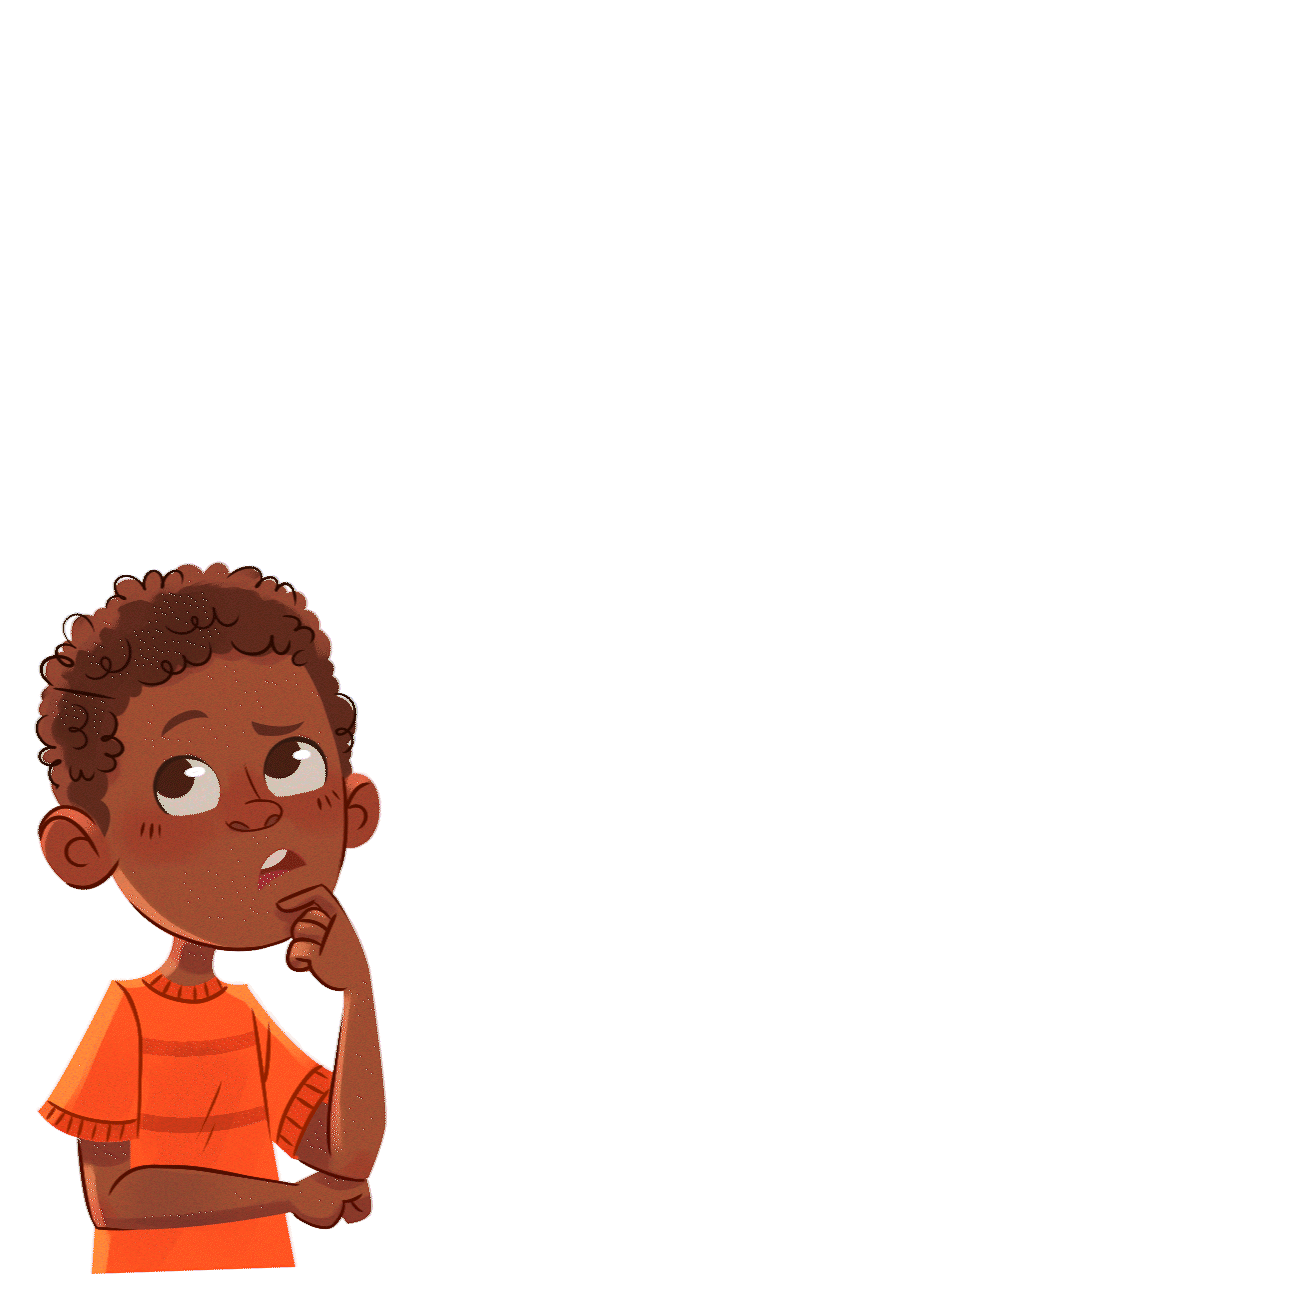 A colorful cartoon portrait of a kid with dark skin and an orange shirt, looking pensive as a though bubble appears above his head.a